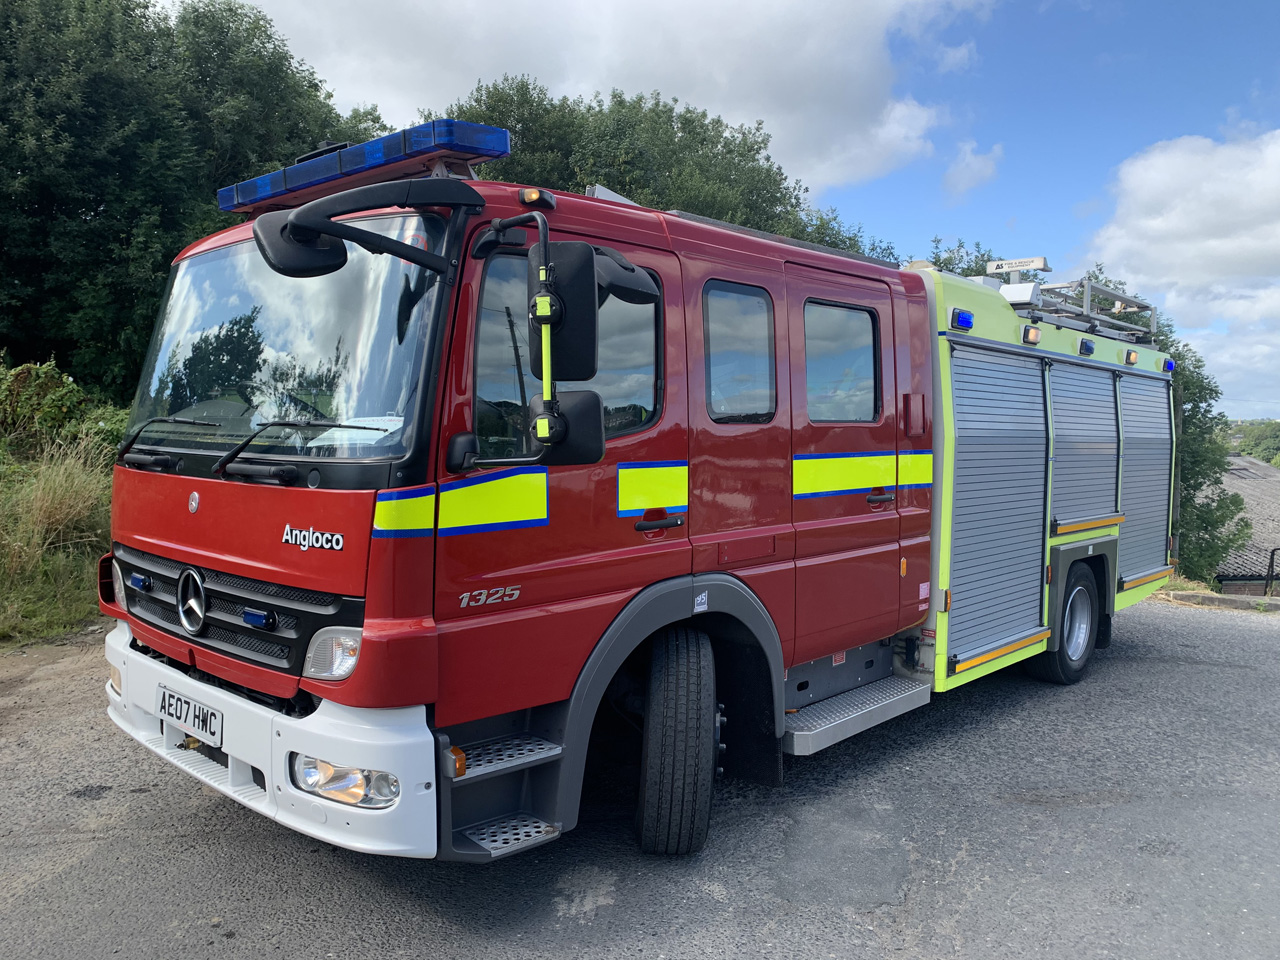 Mercedes Atego 1325F - Evems Limited - Good quality fire engines for sale